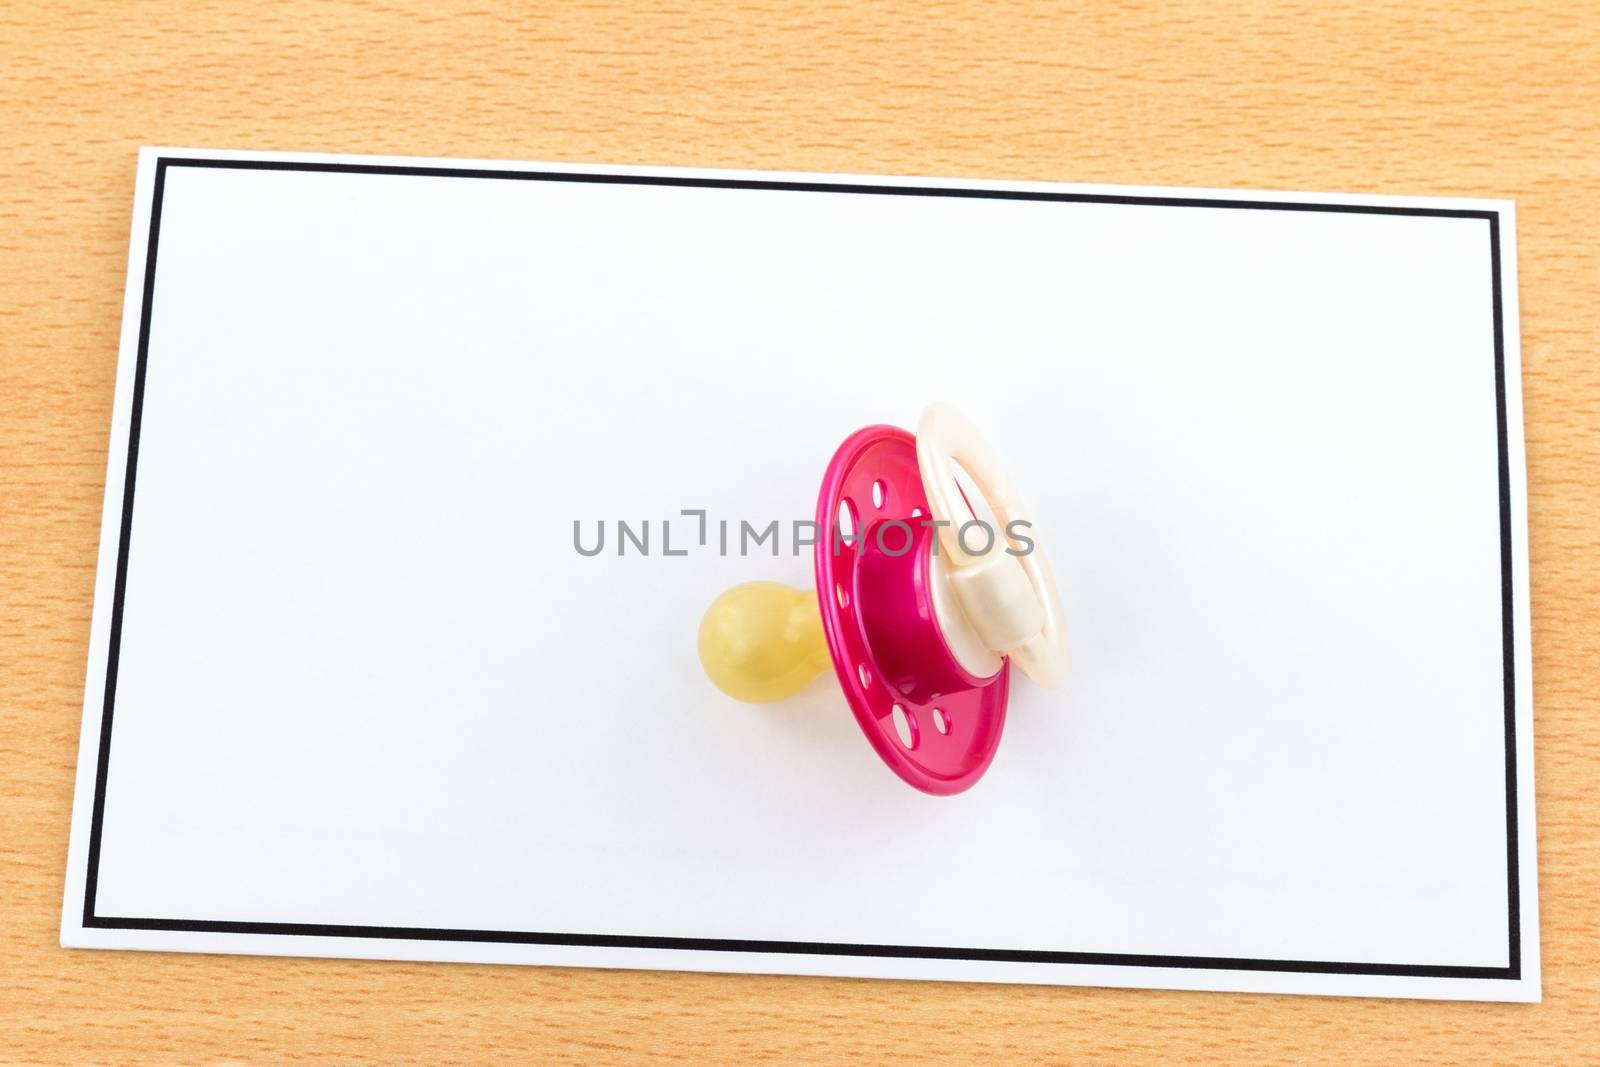 Child Mortality, red pacifier on card with black frame